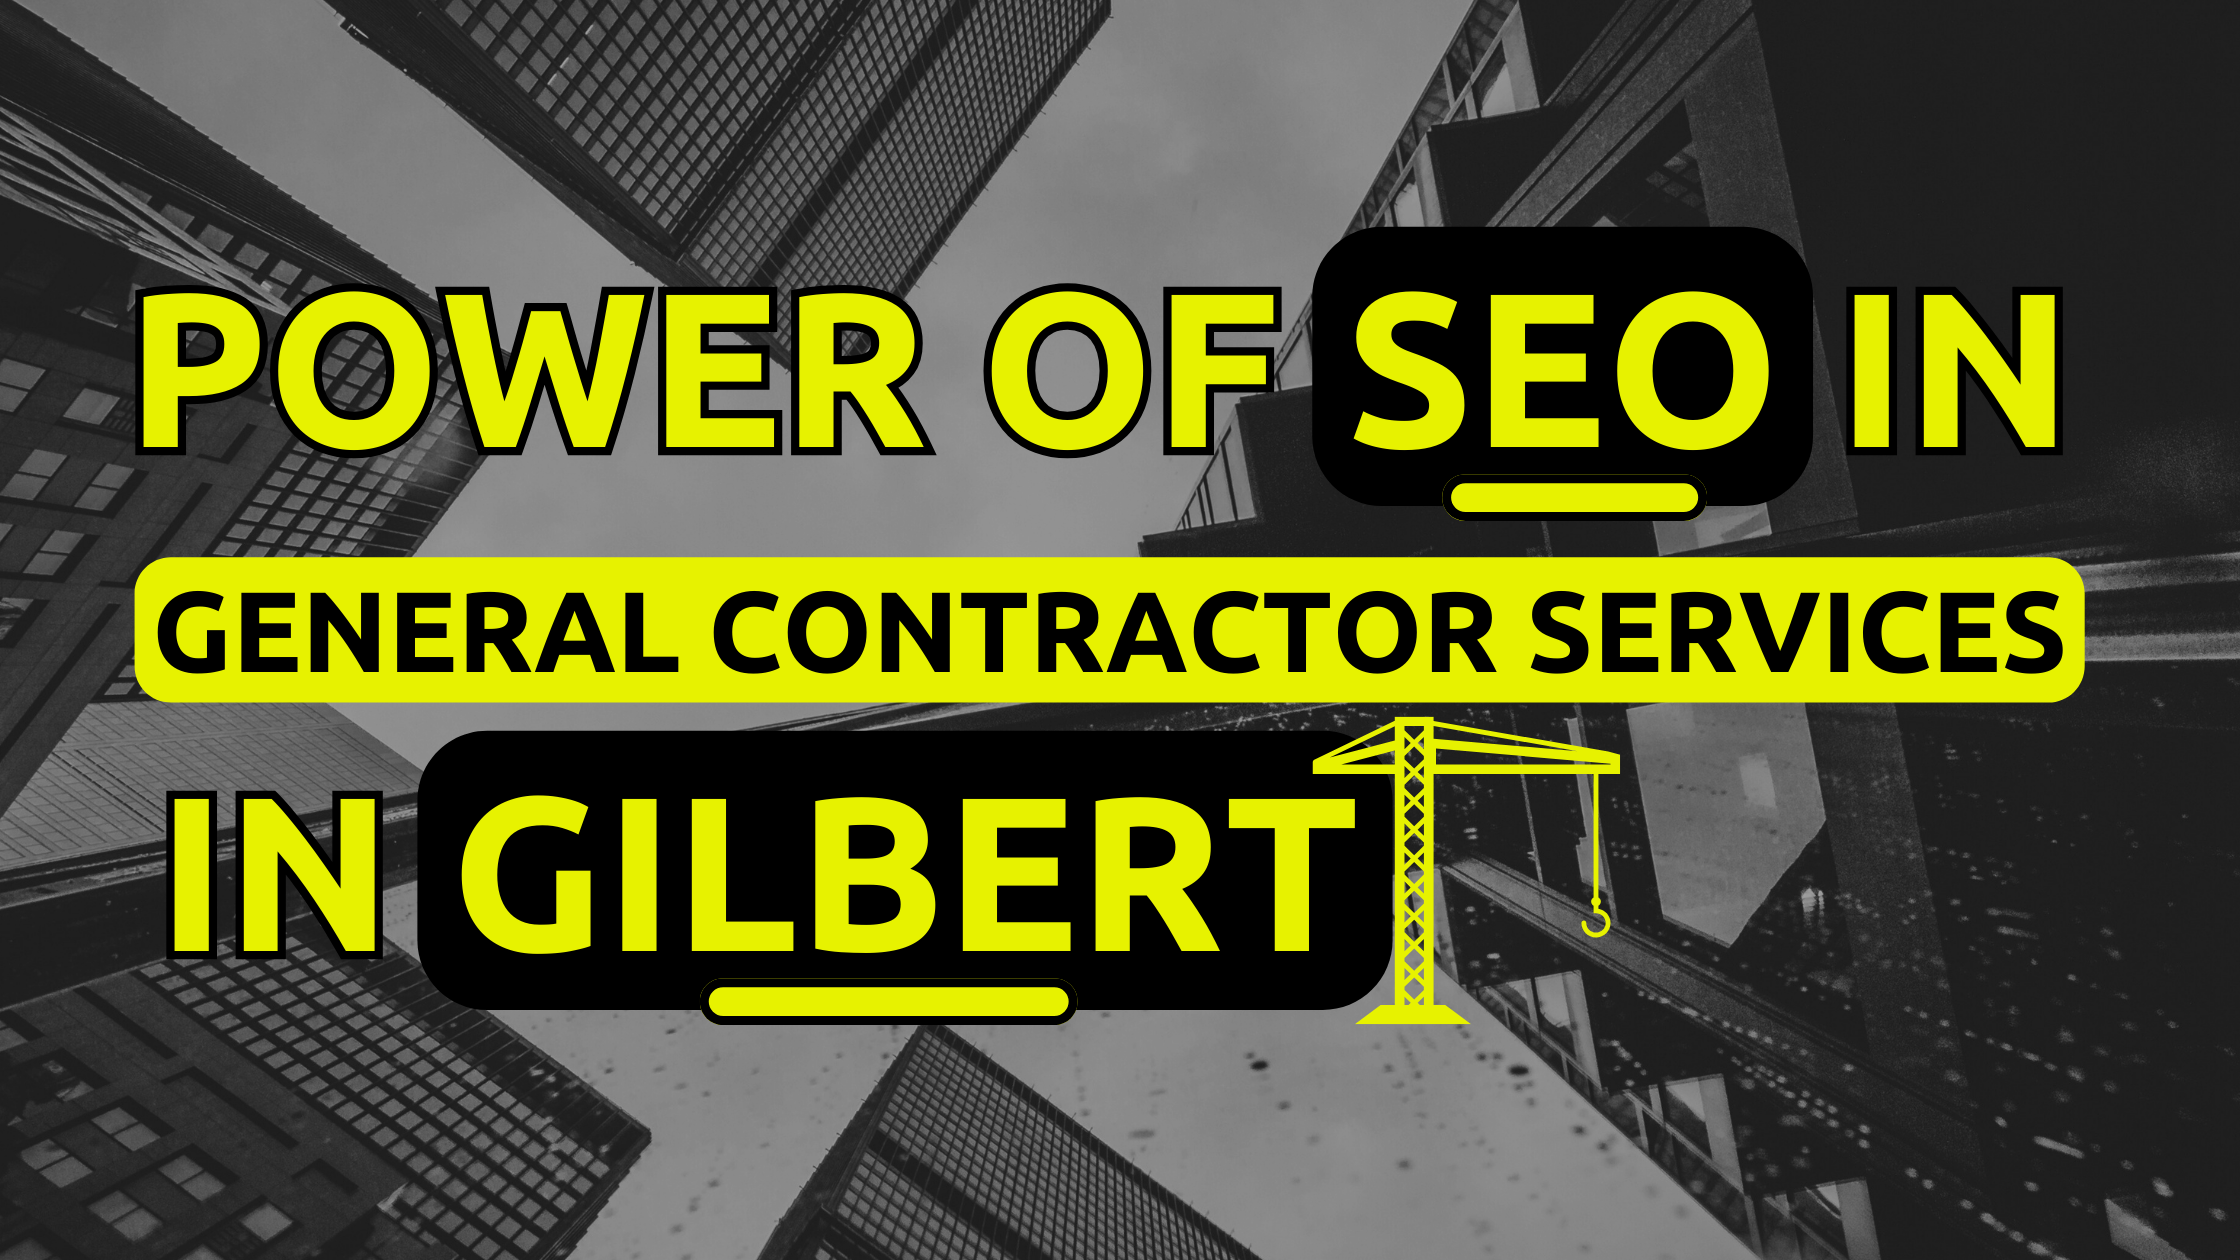 What is the Power of SEO for Contractor Works in Gilbert